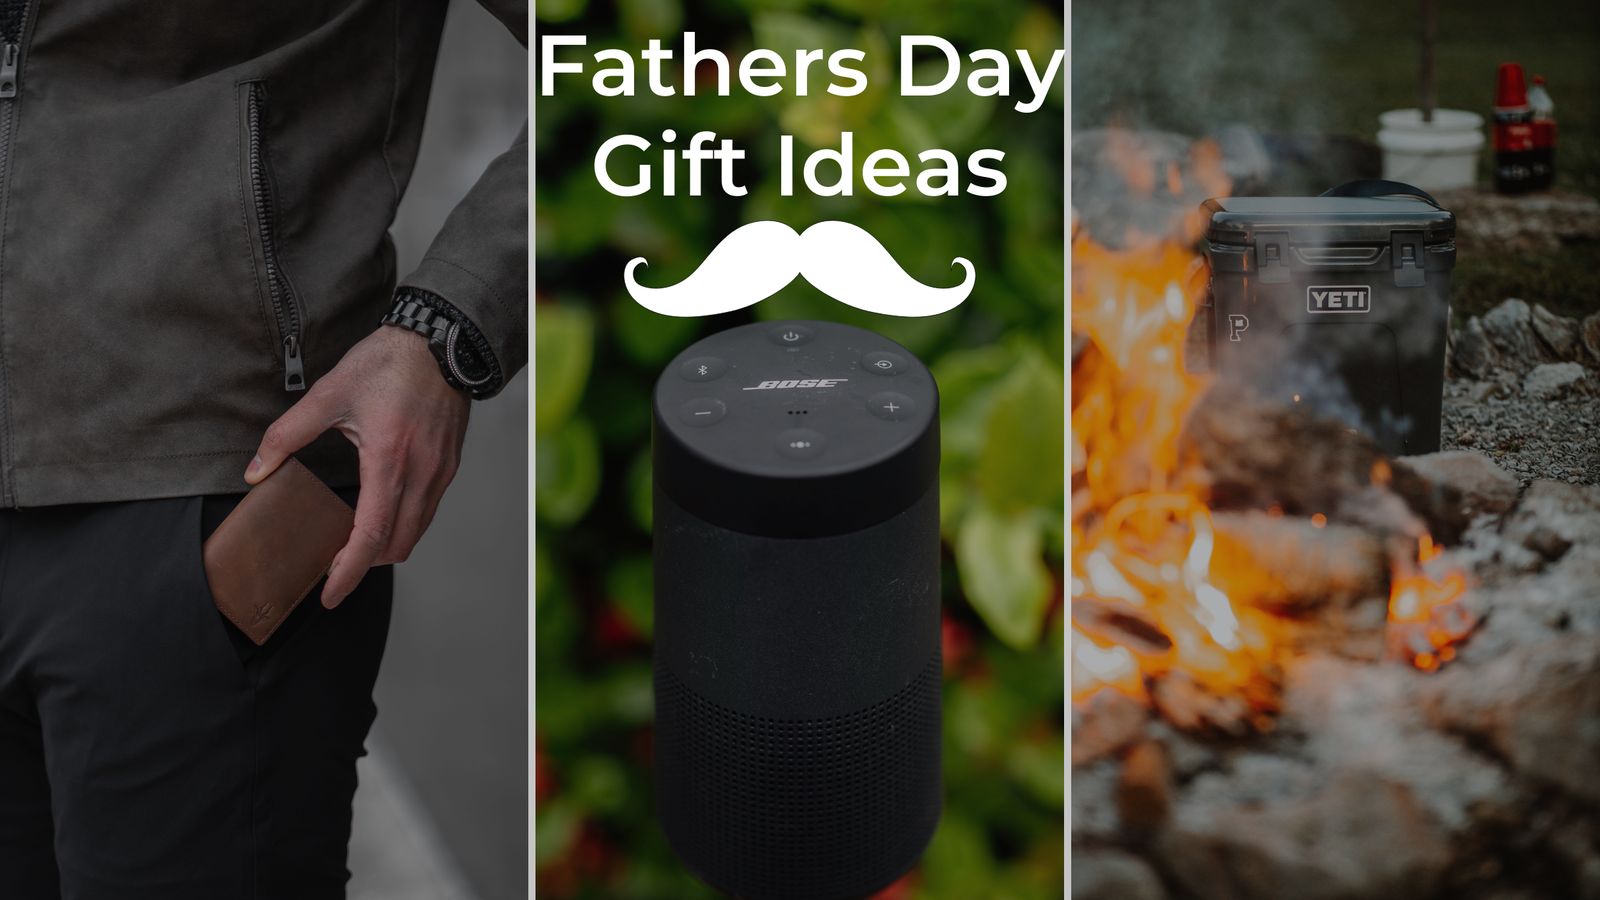 fathers day gift ideas with leather wallet bose speaker & yeti cooler